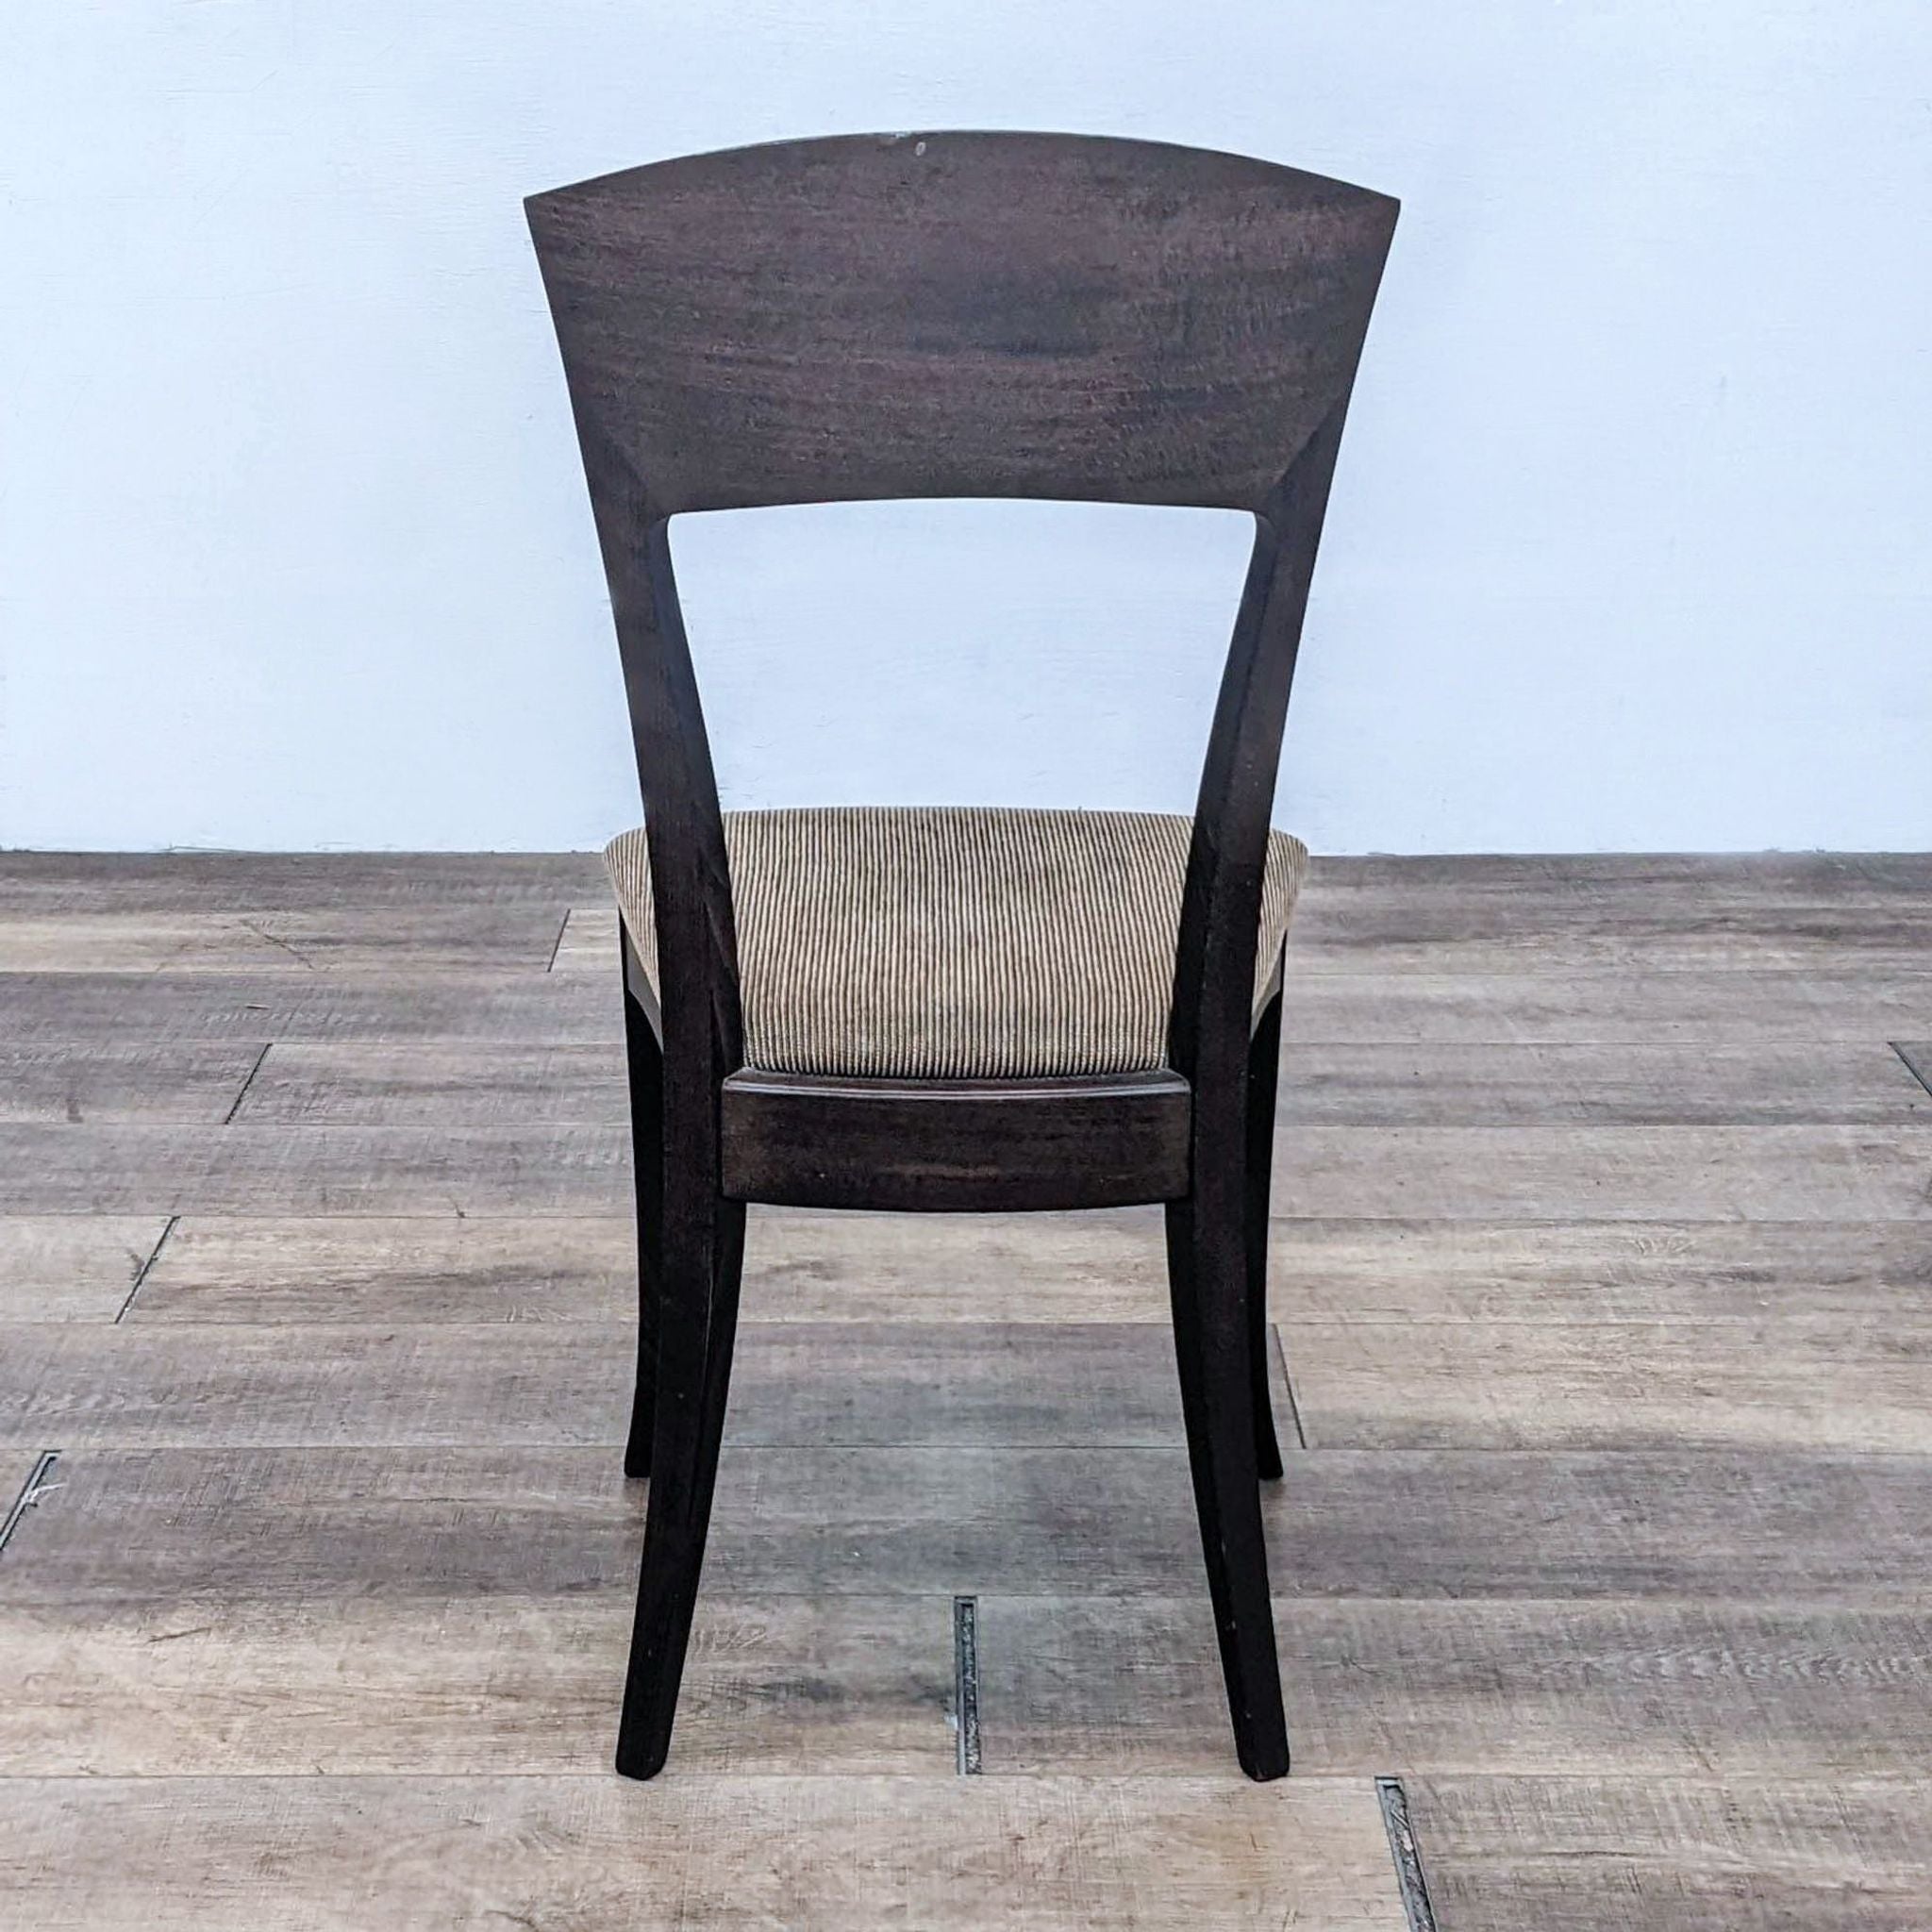 Detailed view of a teak Italian dining chair by A. Sibau, showcasing the wood grain and tan upholstered seat.